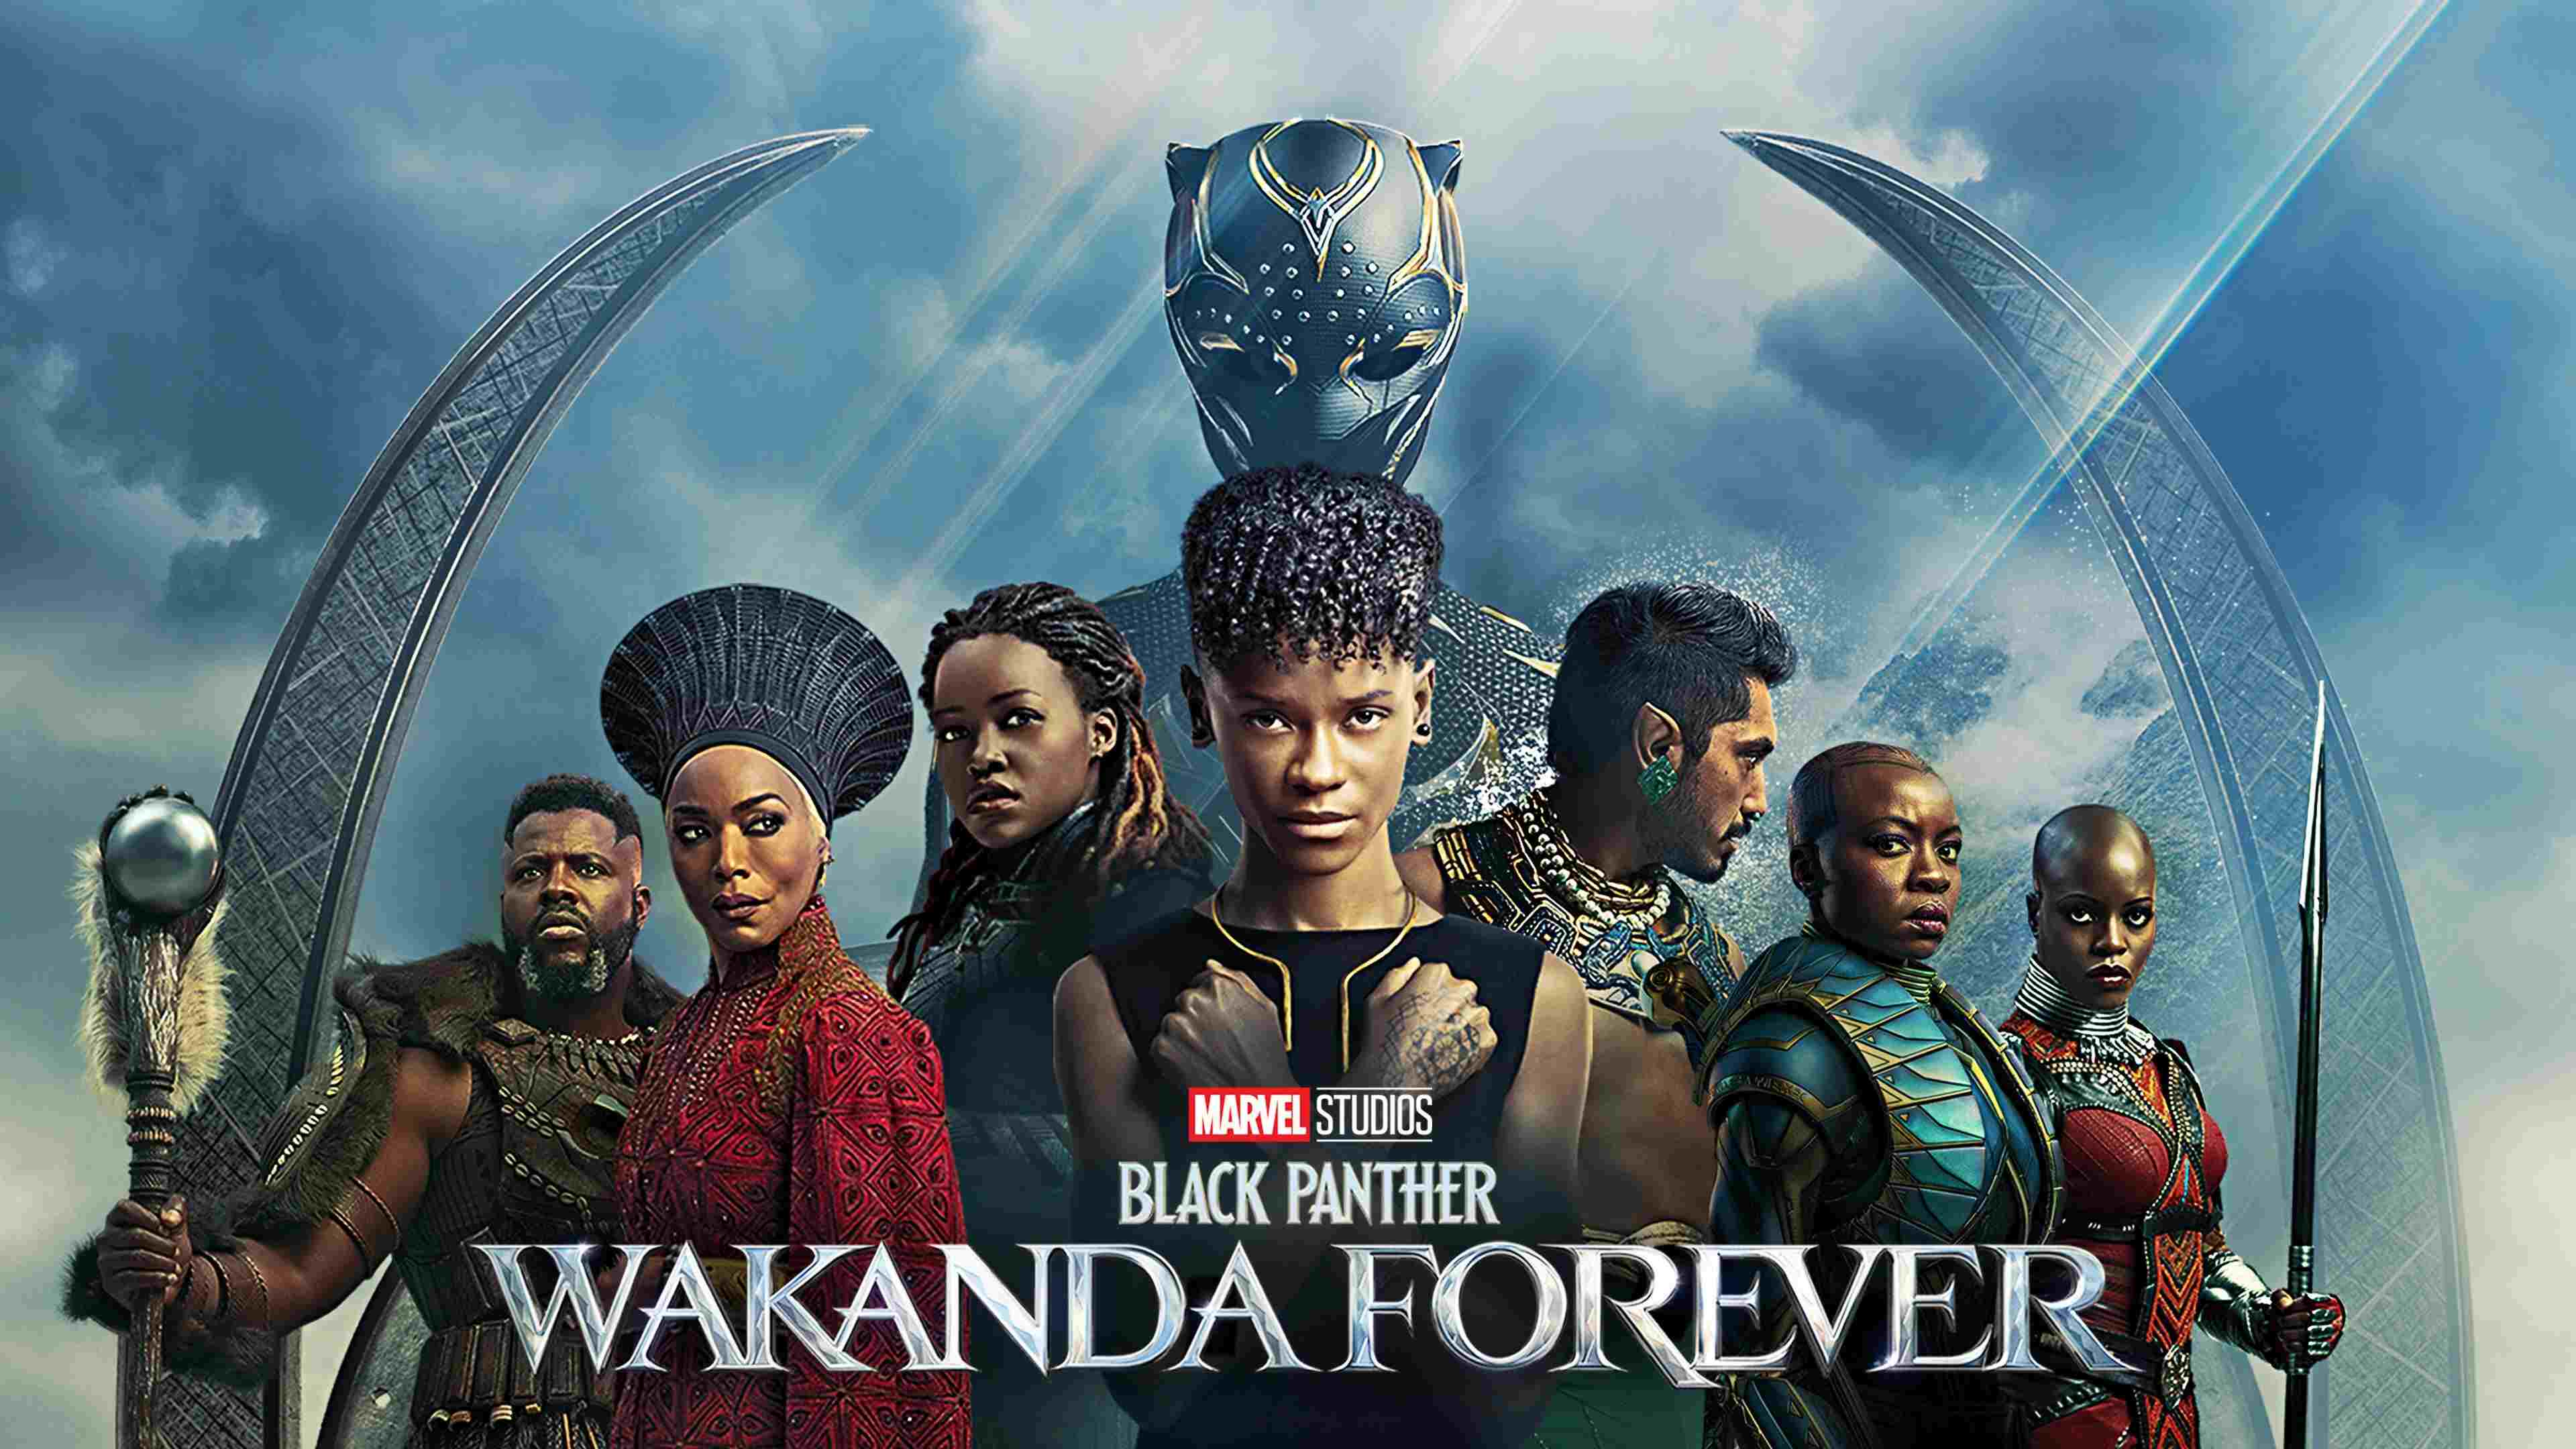 46-facts-about-the-movie-black-panther-wakanda-forever